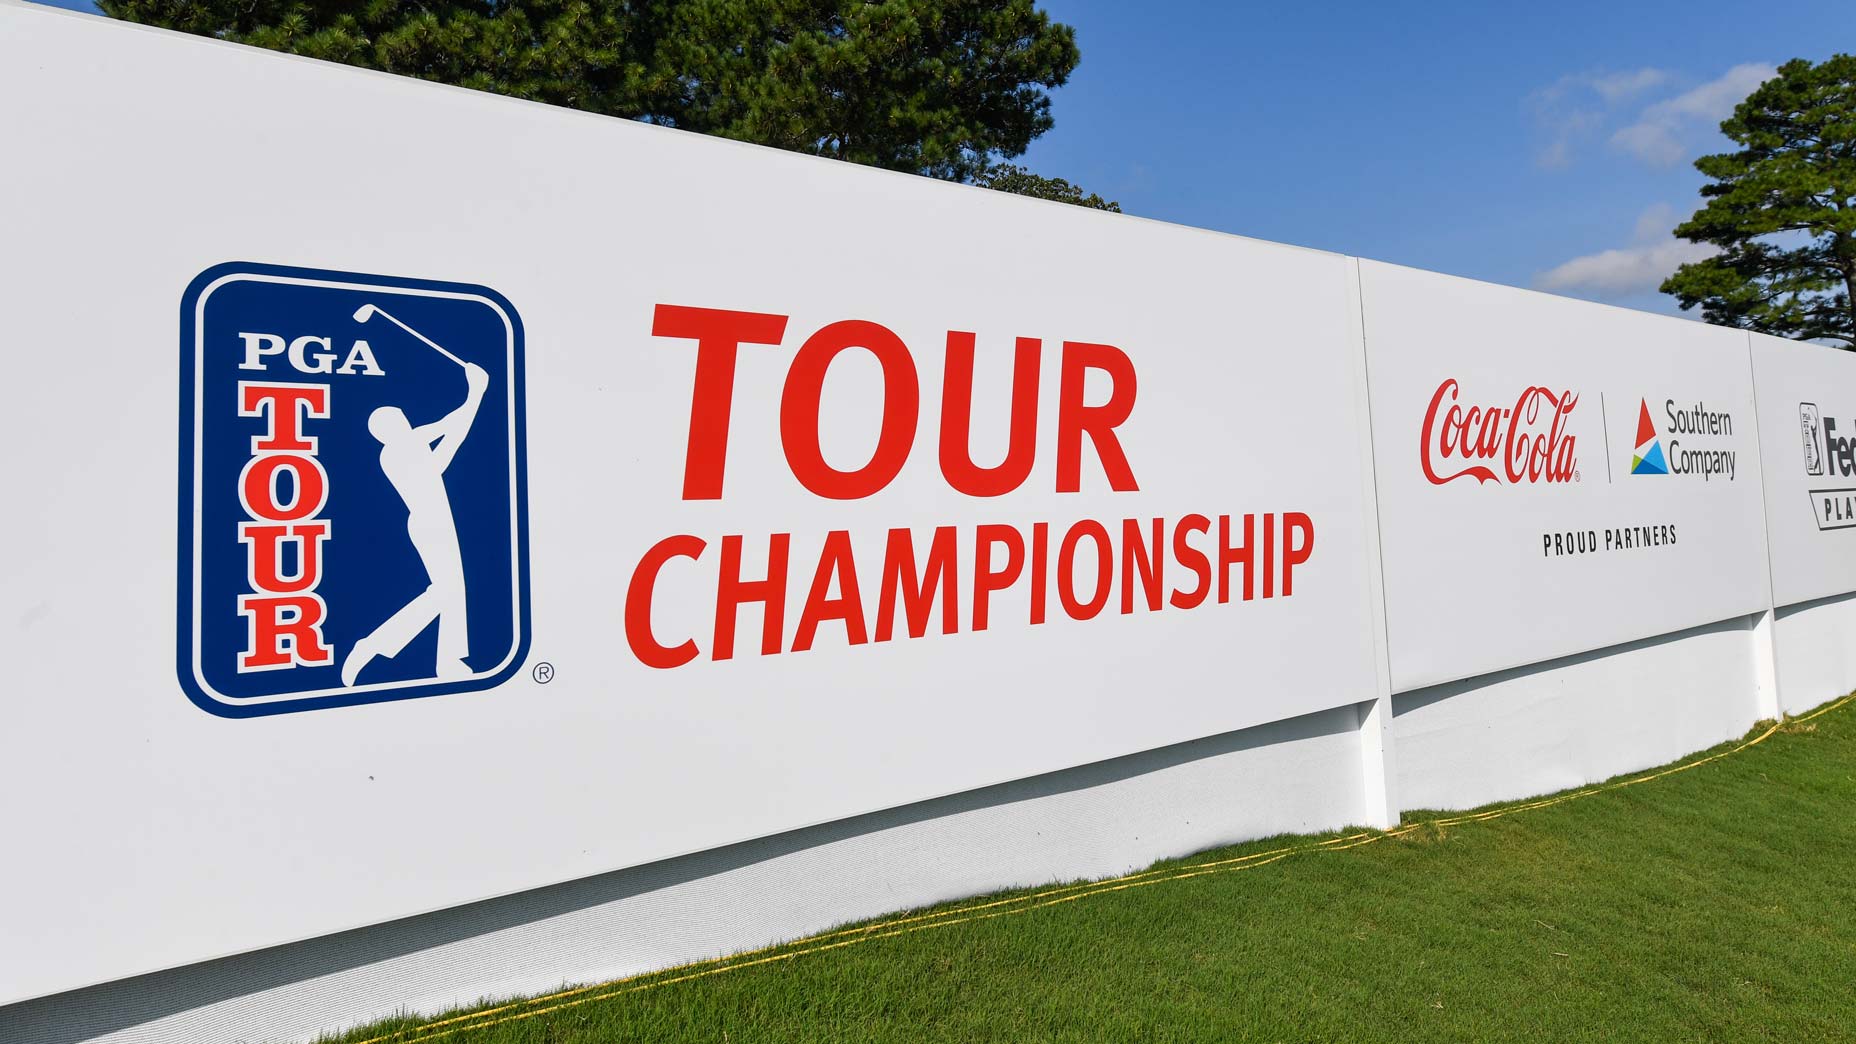 how does the tour championship format work